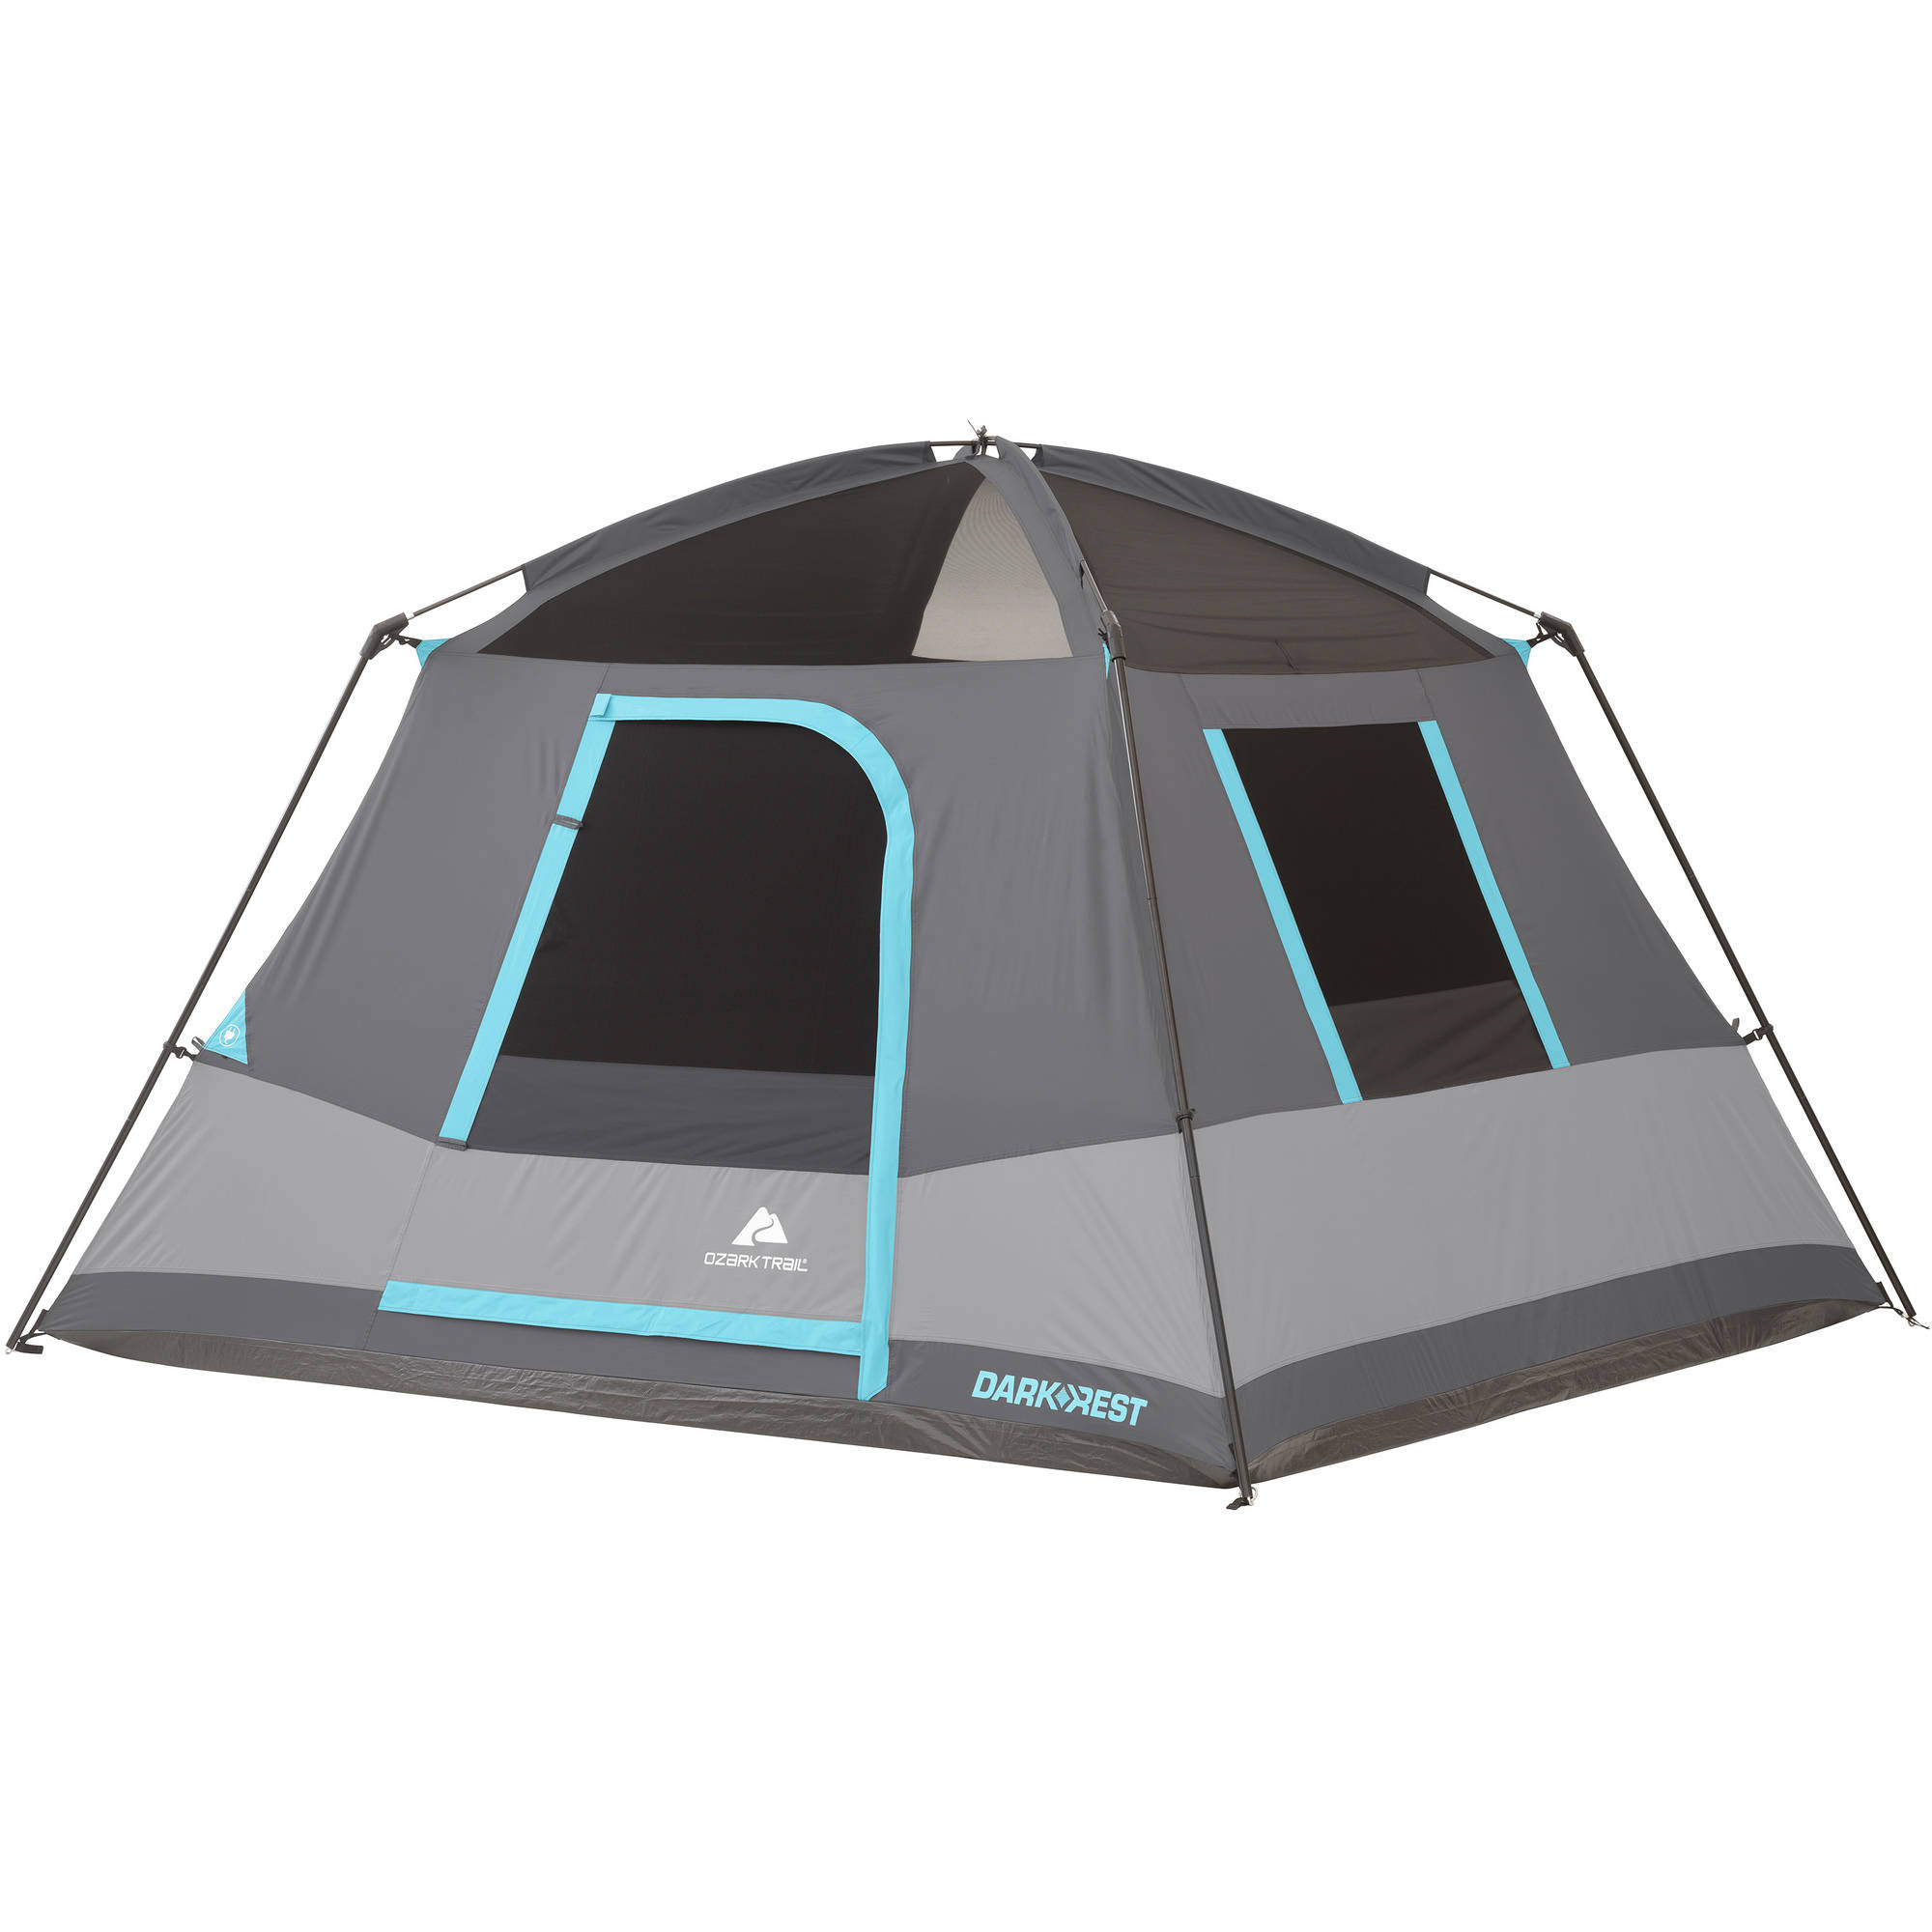 Ozark Trail 10' x 9' 6-Person Dark Rest Cabin Tent w/Skylight Ceiling Panels, 15.4 lbs - image 6 of 7